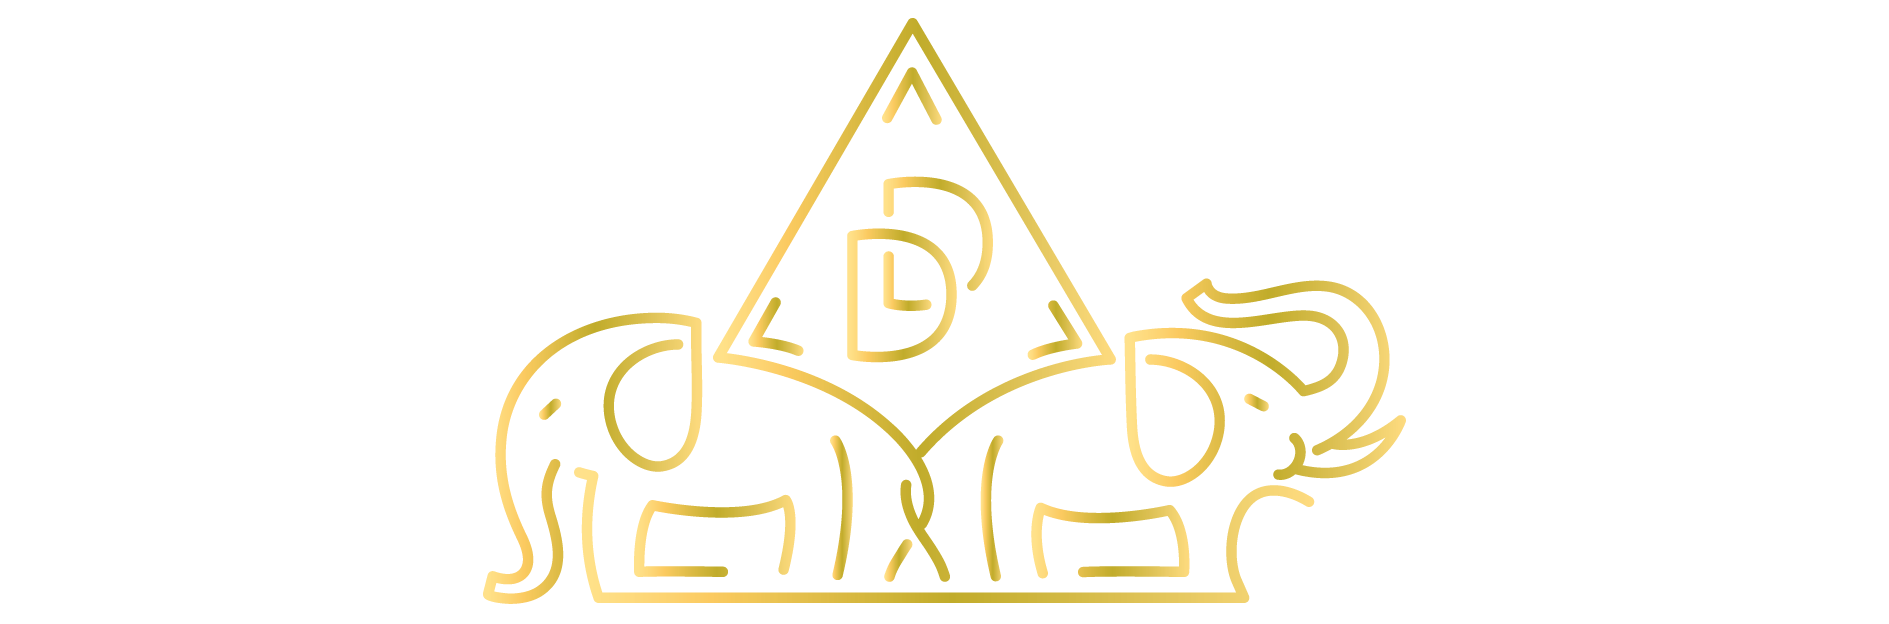 Devs Does logo of two golden elephants with DD balanced on their backs